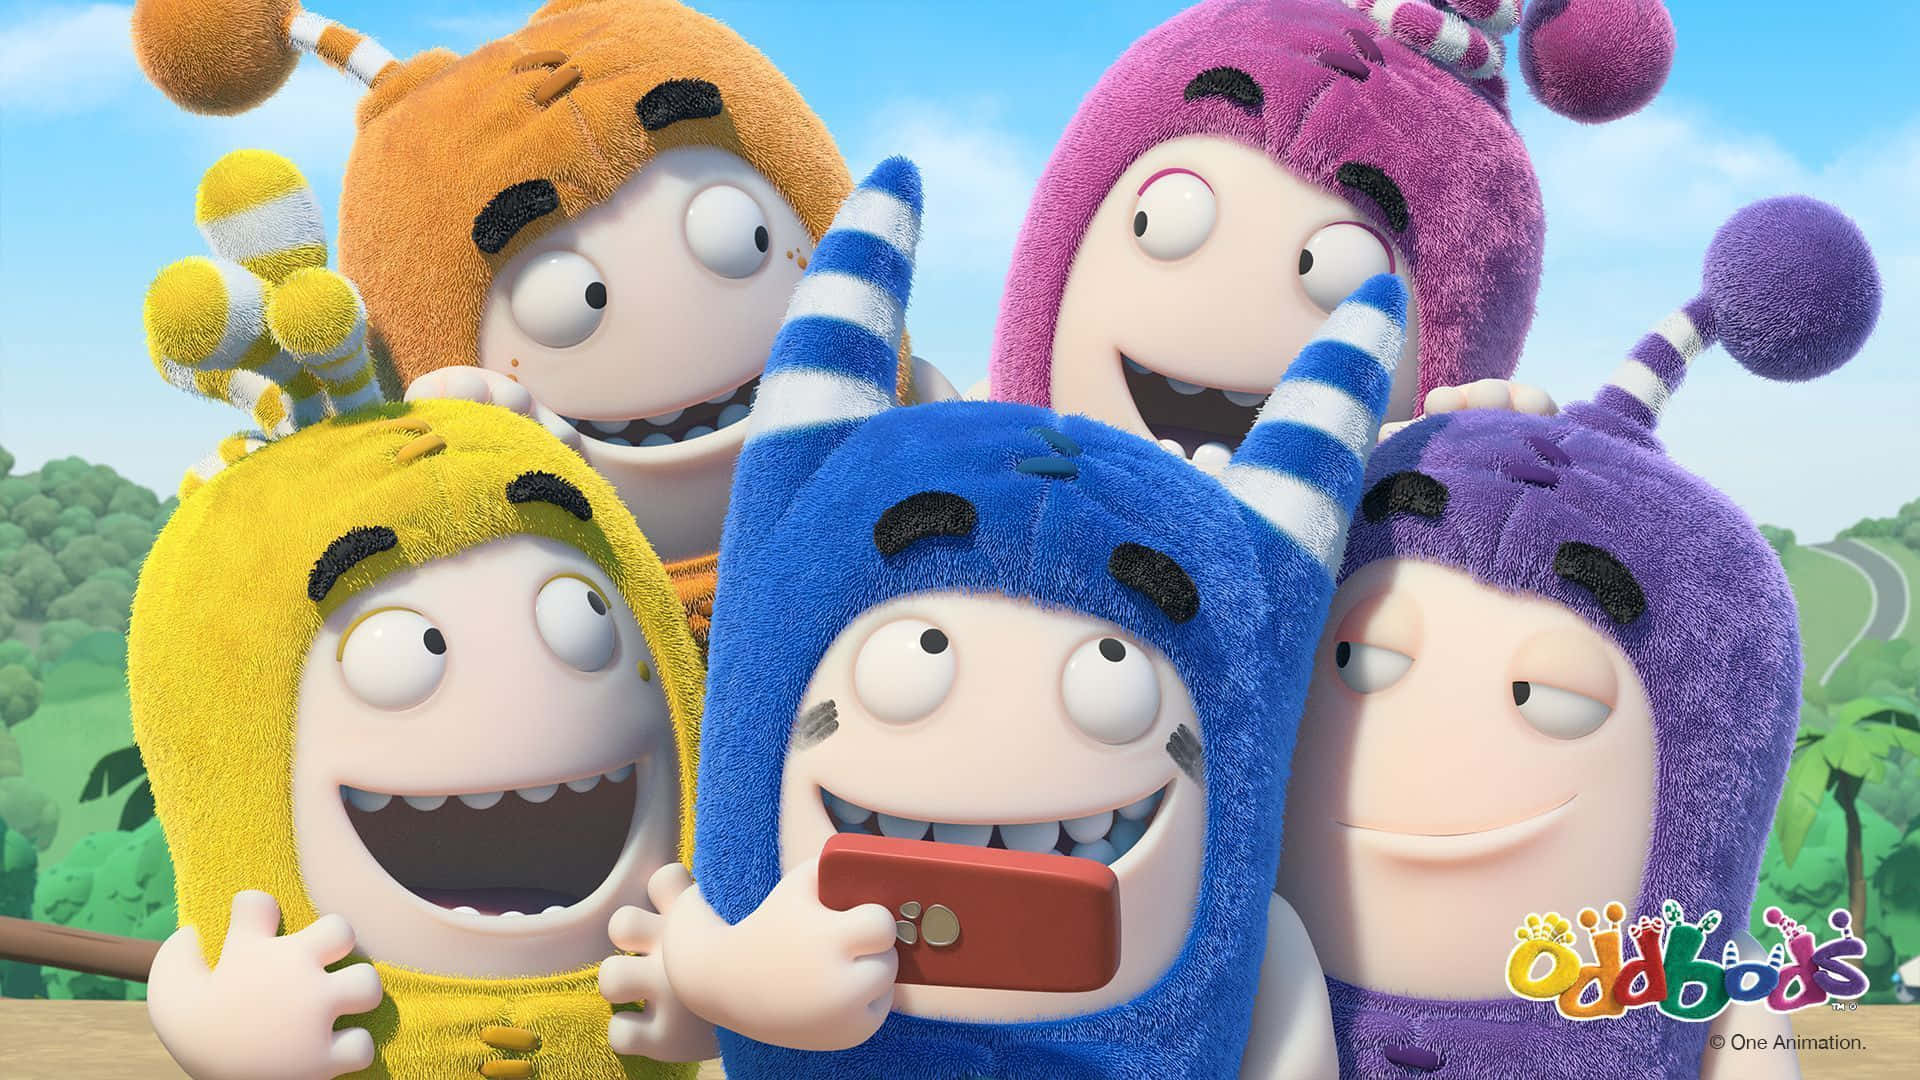 The Oddbods are all together for a fun filled adventure Wallpaper